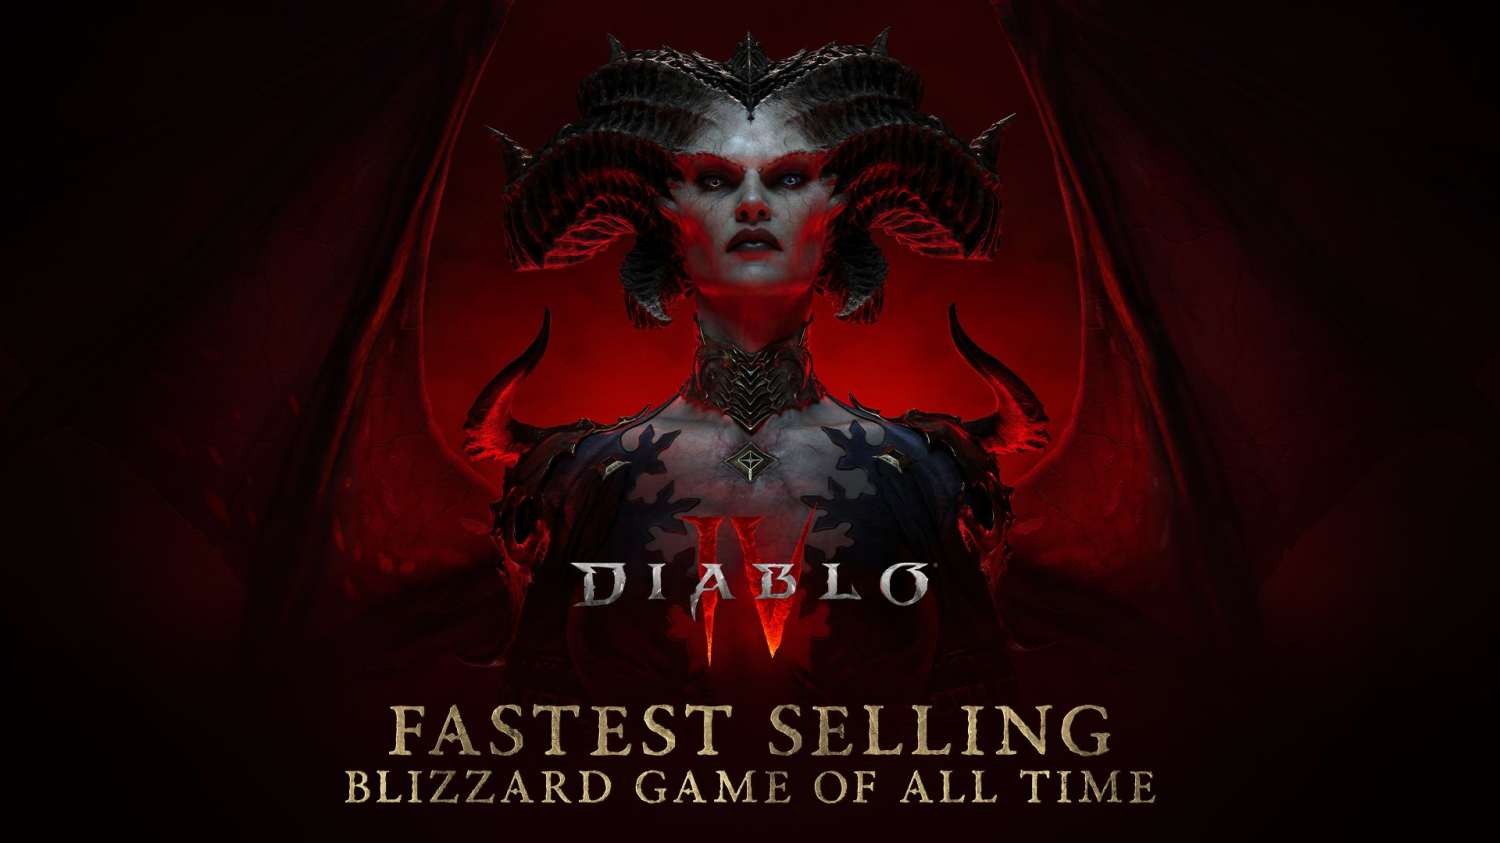 91748_4_diablo-iv-is-blizzards-fastest-selling-game-of-all-time_full.png